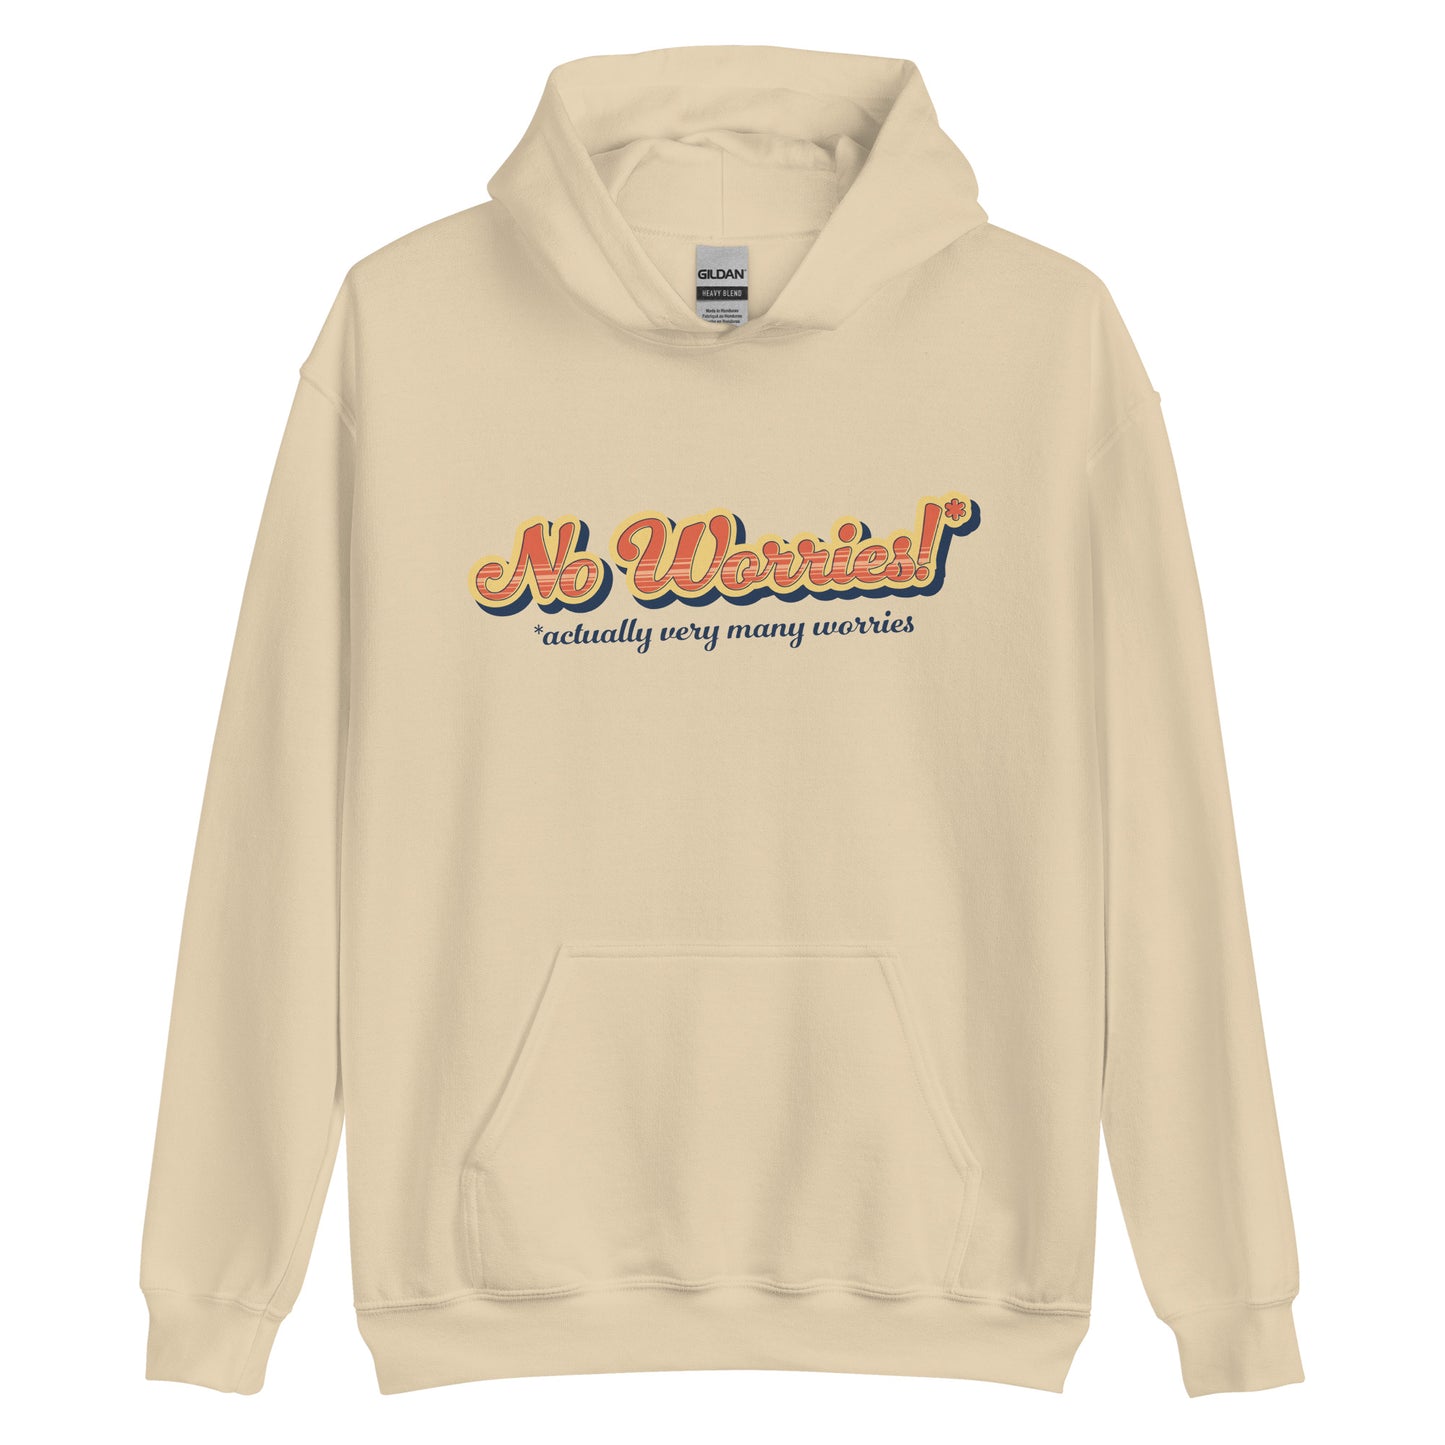 A light beige hooded sweatshirt featuring vintage style text that reads "No worries!* *actually very many worries"